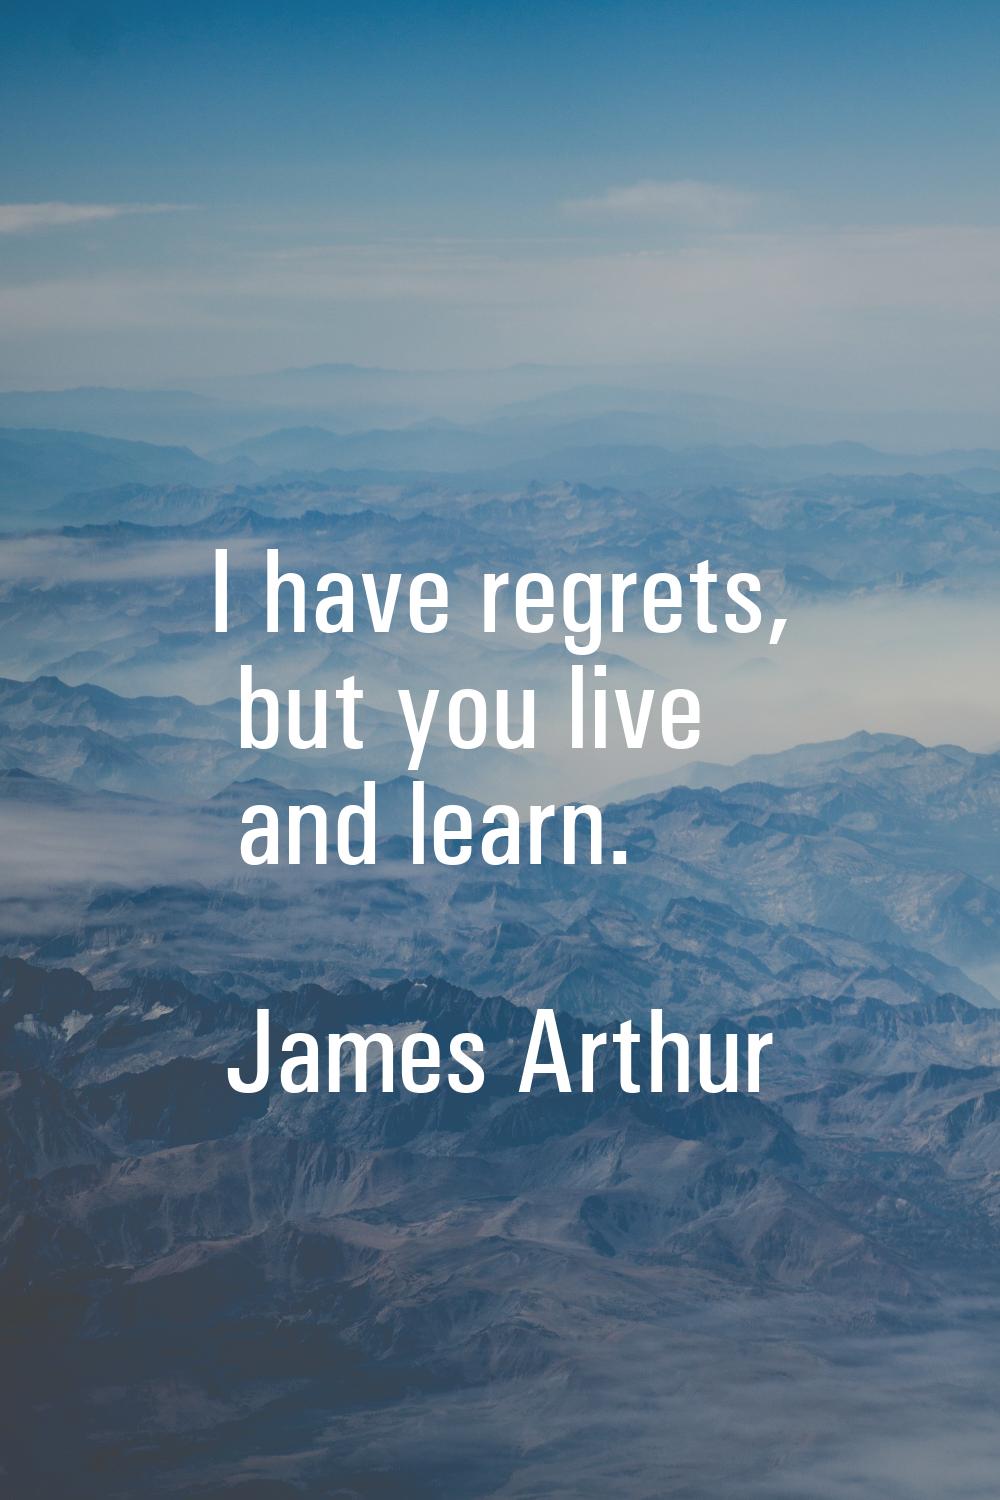 I have regrets, but you live and learn.